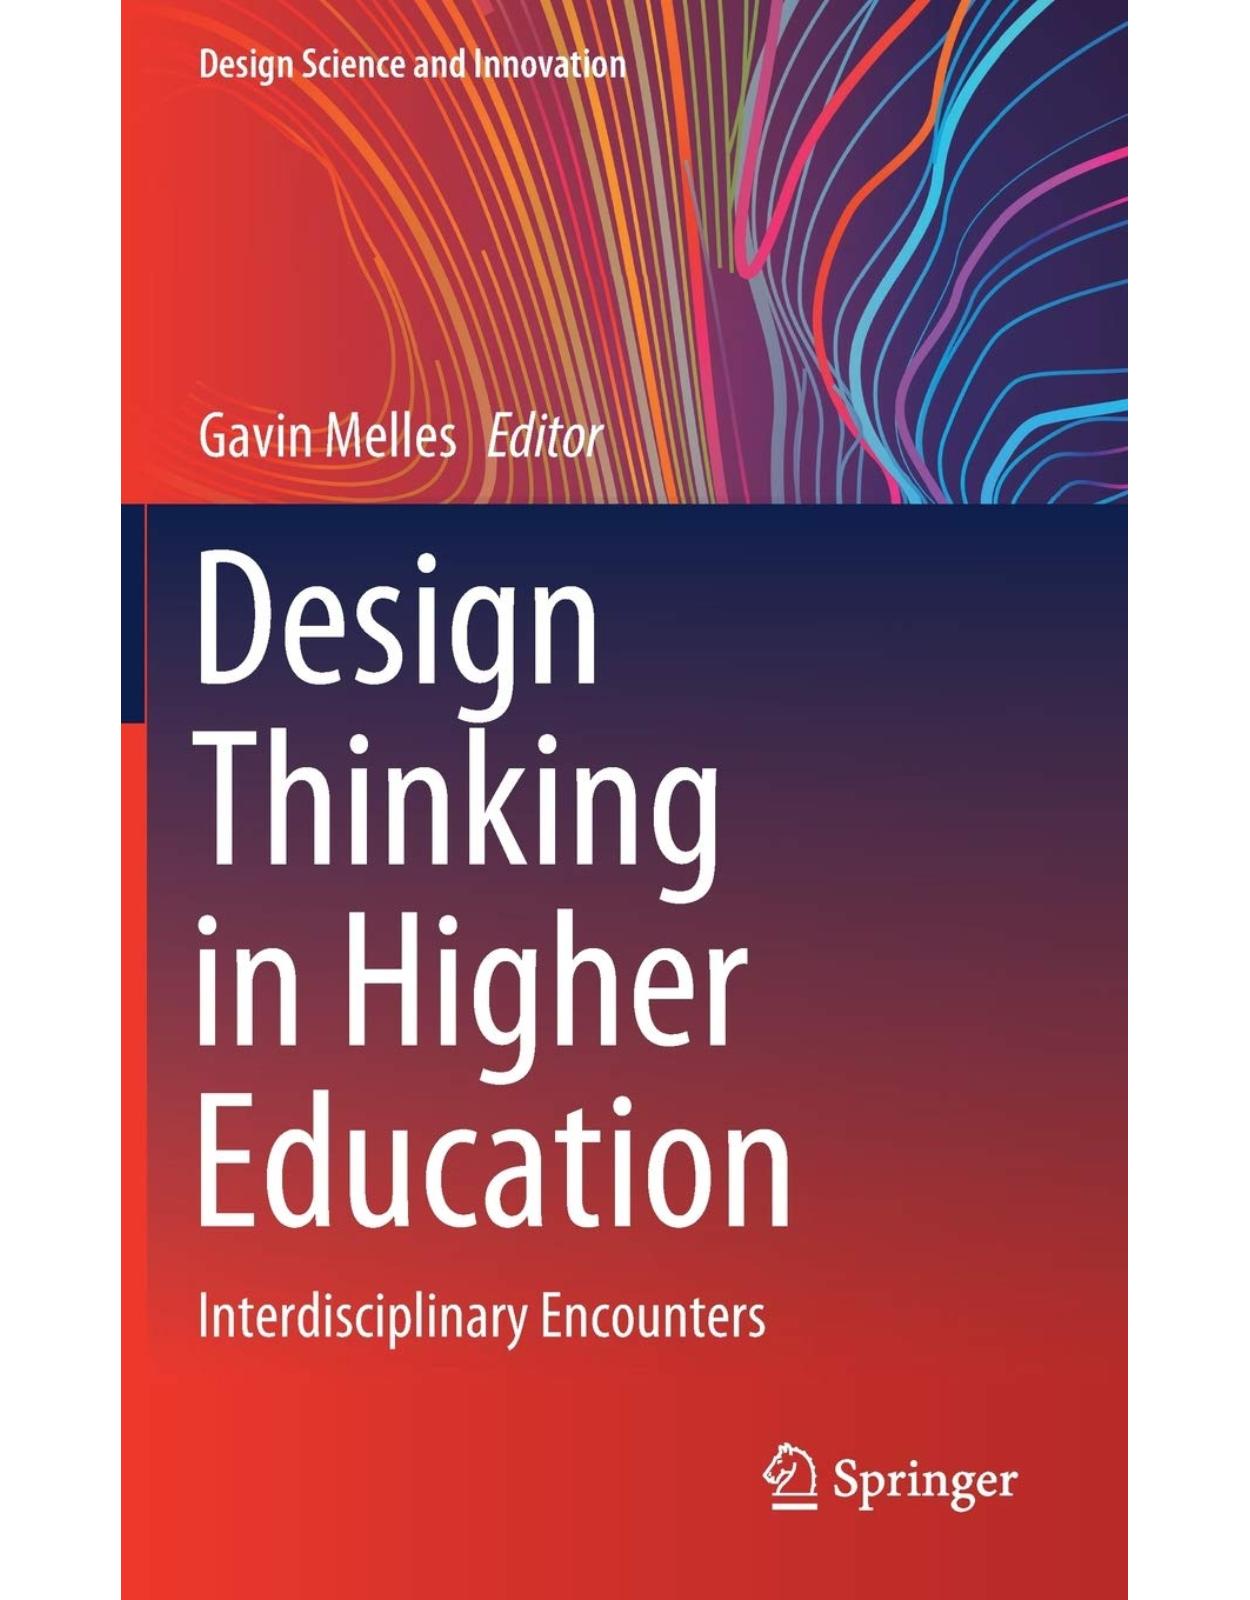 Design Thinking in Higher Education: Interdisciplinary Encounters (Design Science and Innovation) 